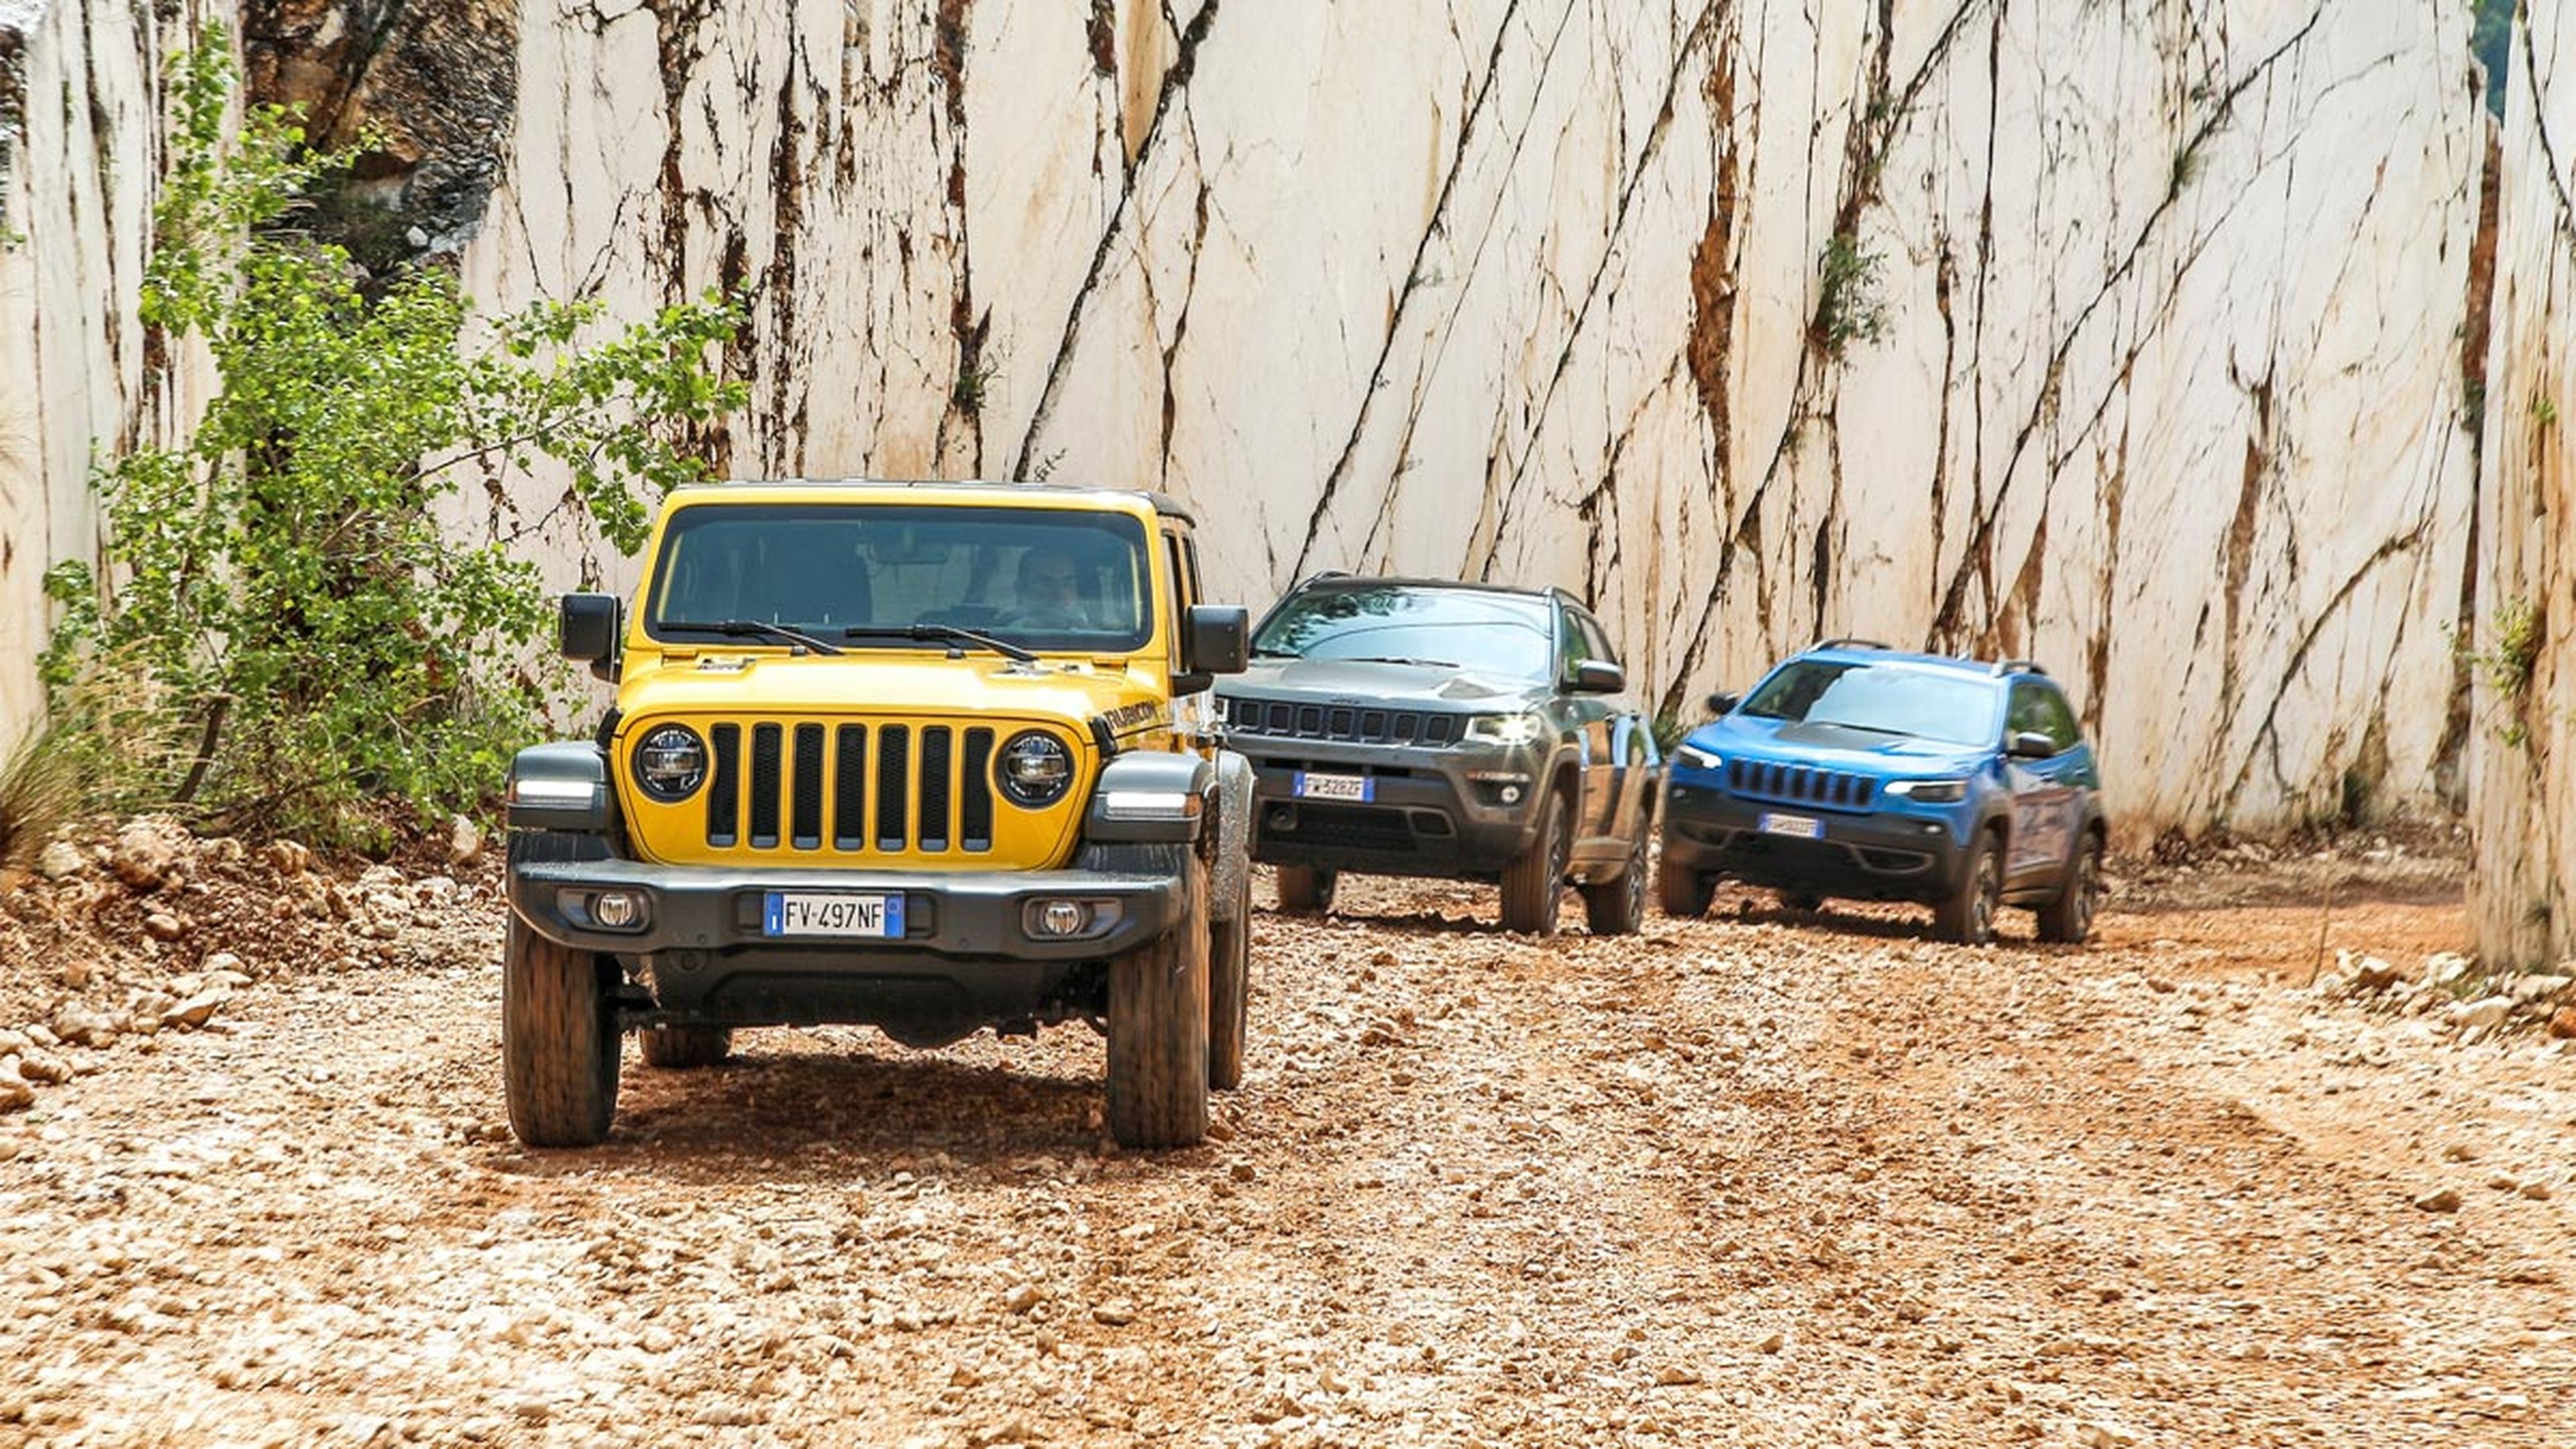 Jeep gama off-road